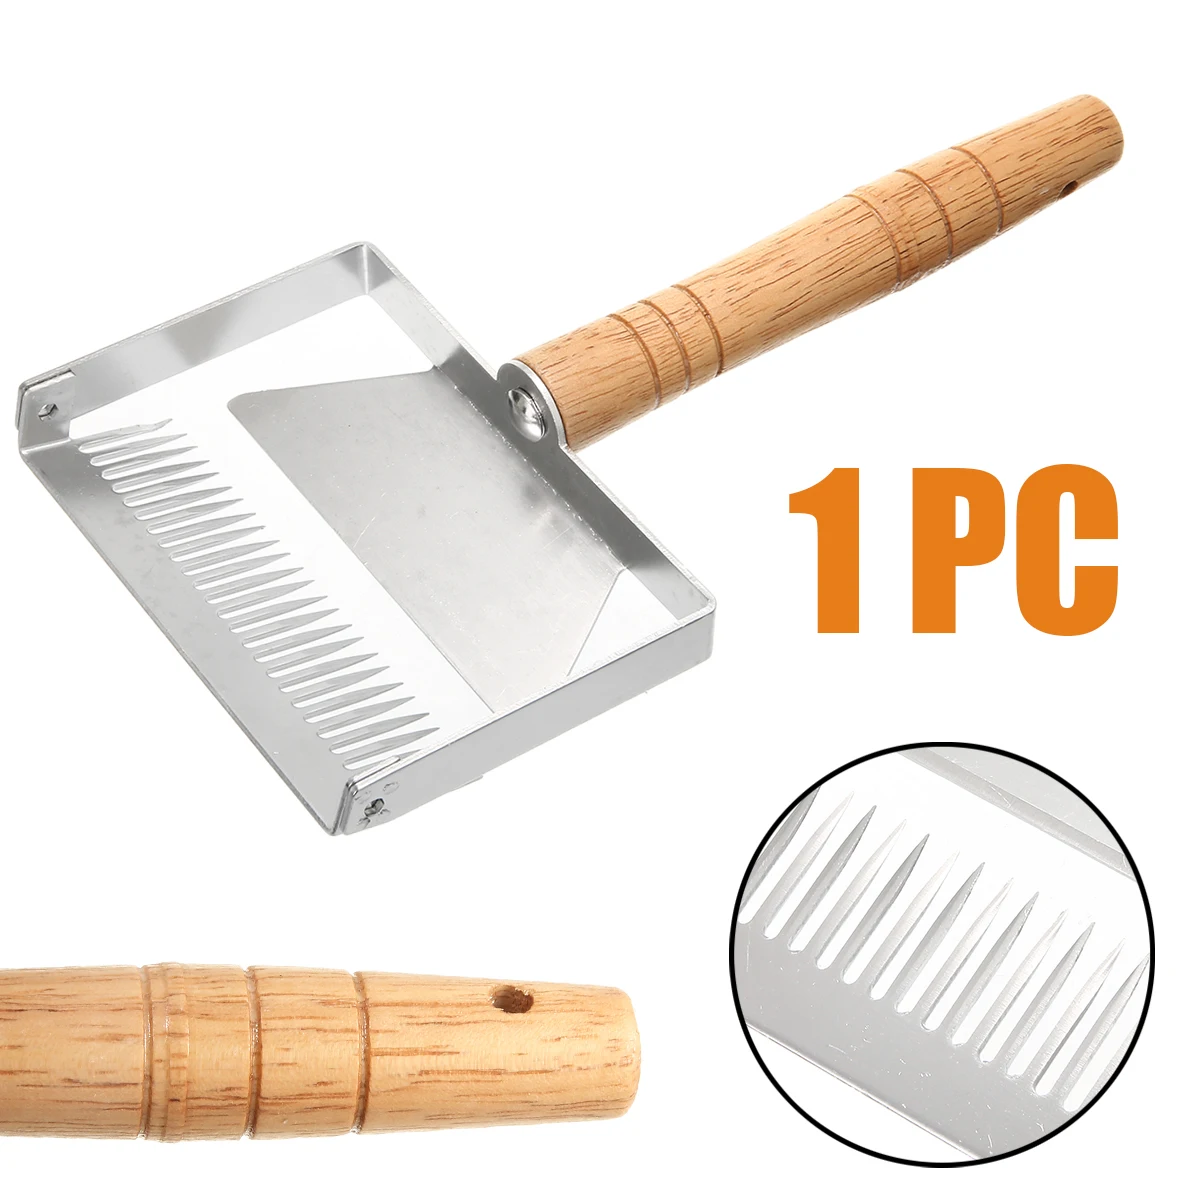 

New Honey Fork Honeycomb 25cm Stainless Steel Uncapping Honey Fork Scraper Wooden Handle For Beekeeping Agricultural Tools